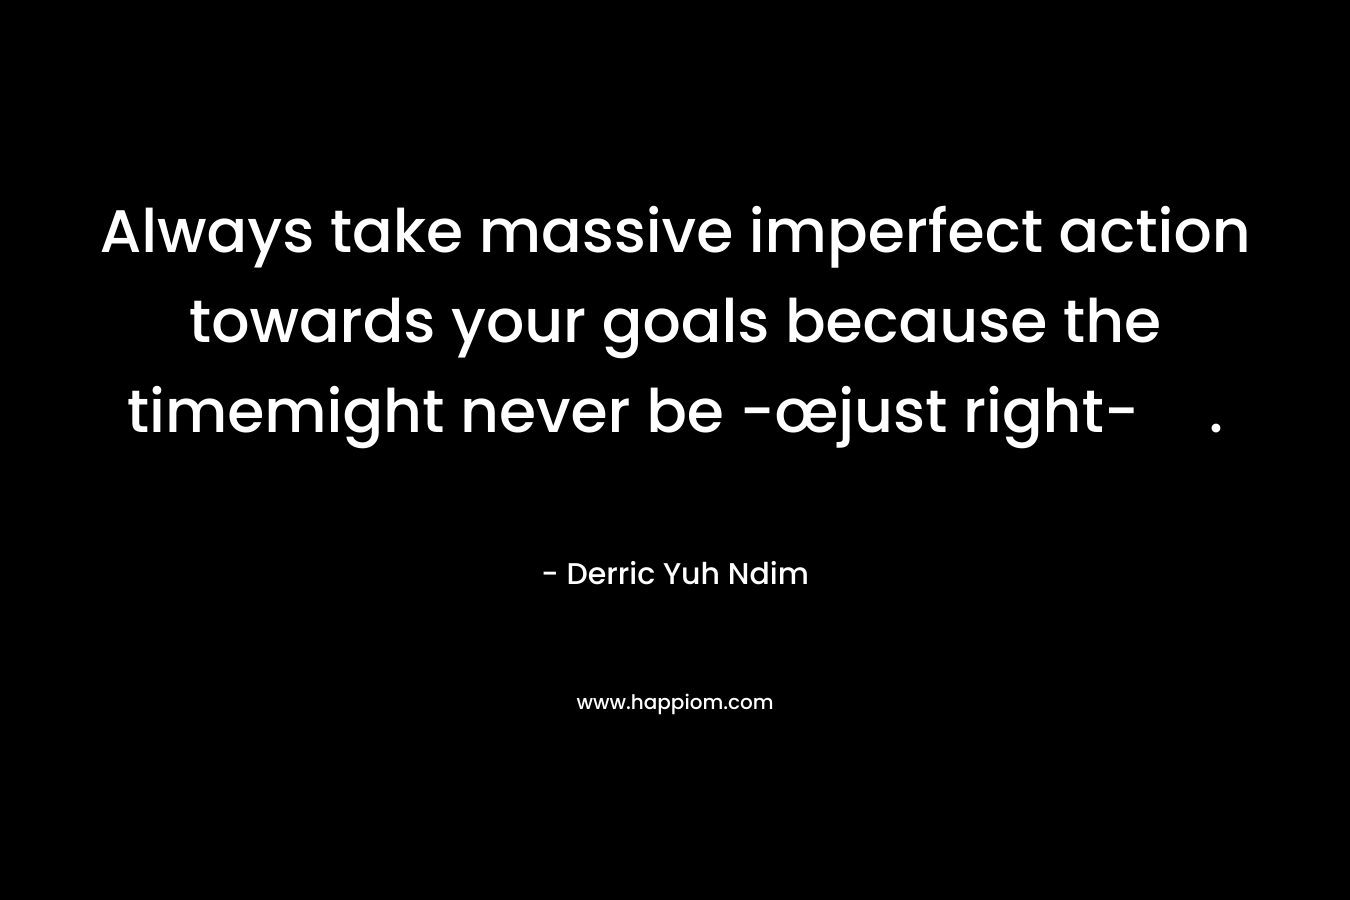 Always take massive imperfect action towards your goals because the timemight never be -œjust right-.